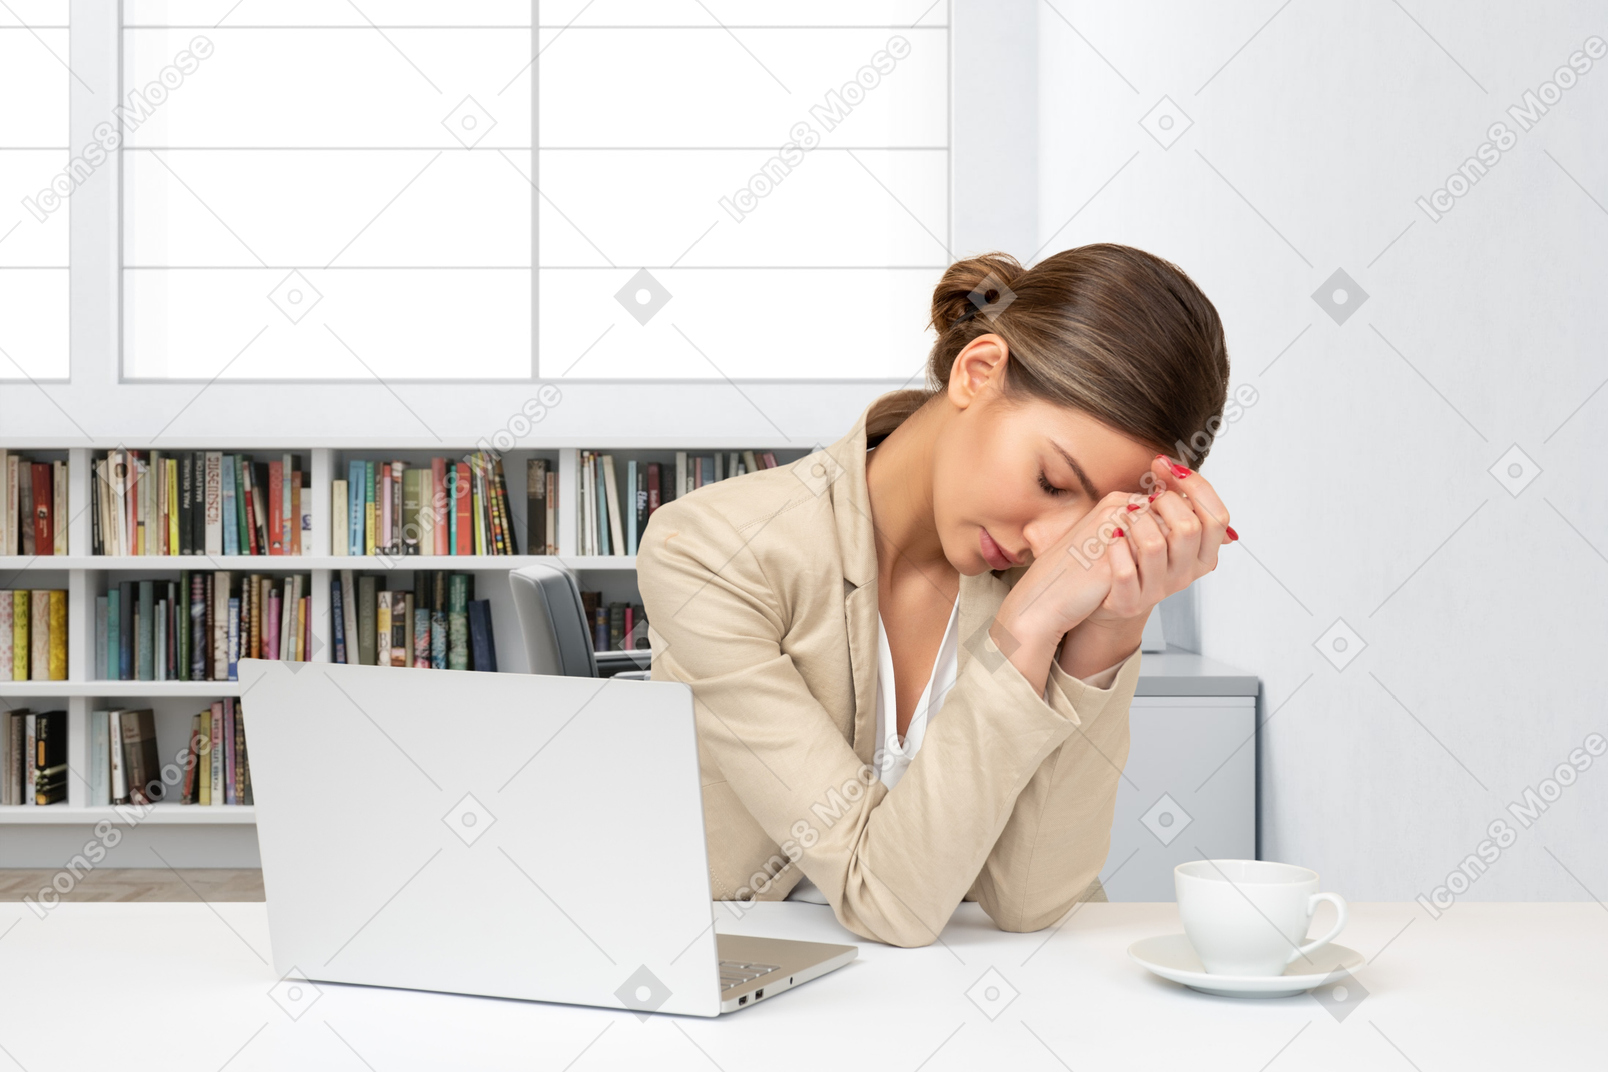 Woman sitting at a desk with a laptop